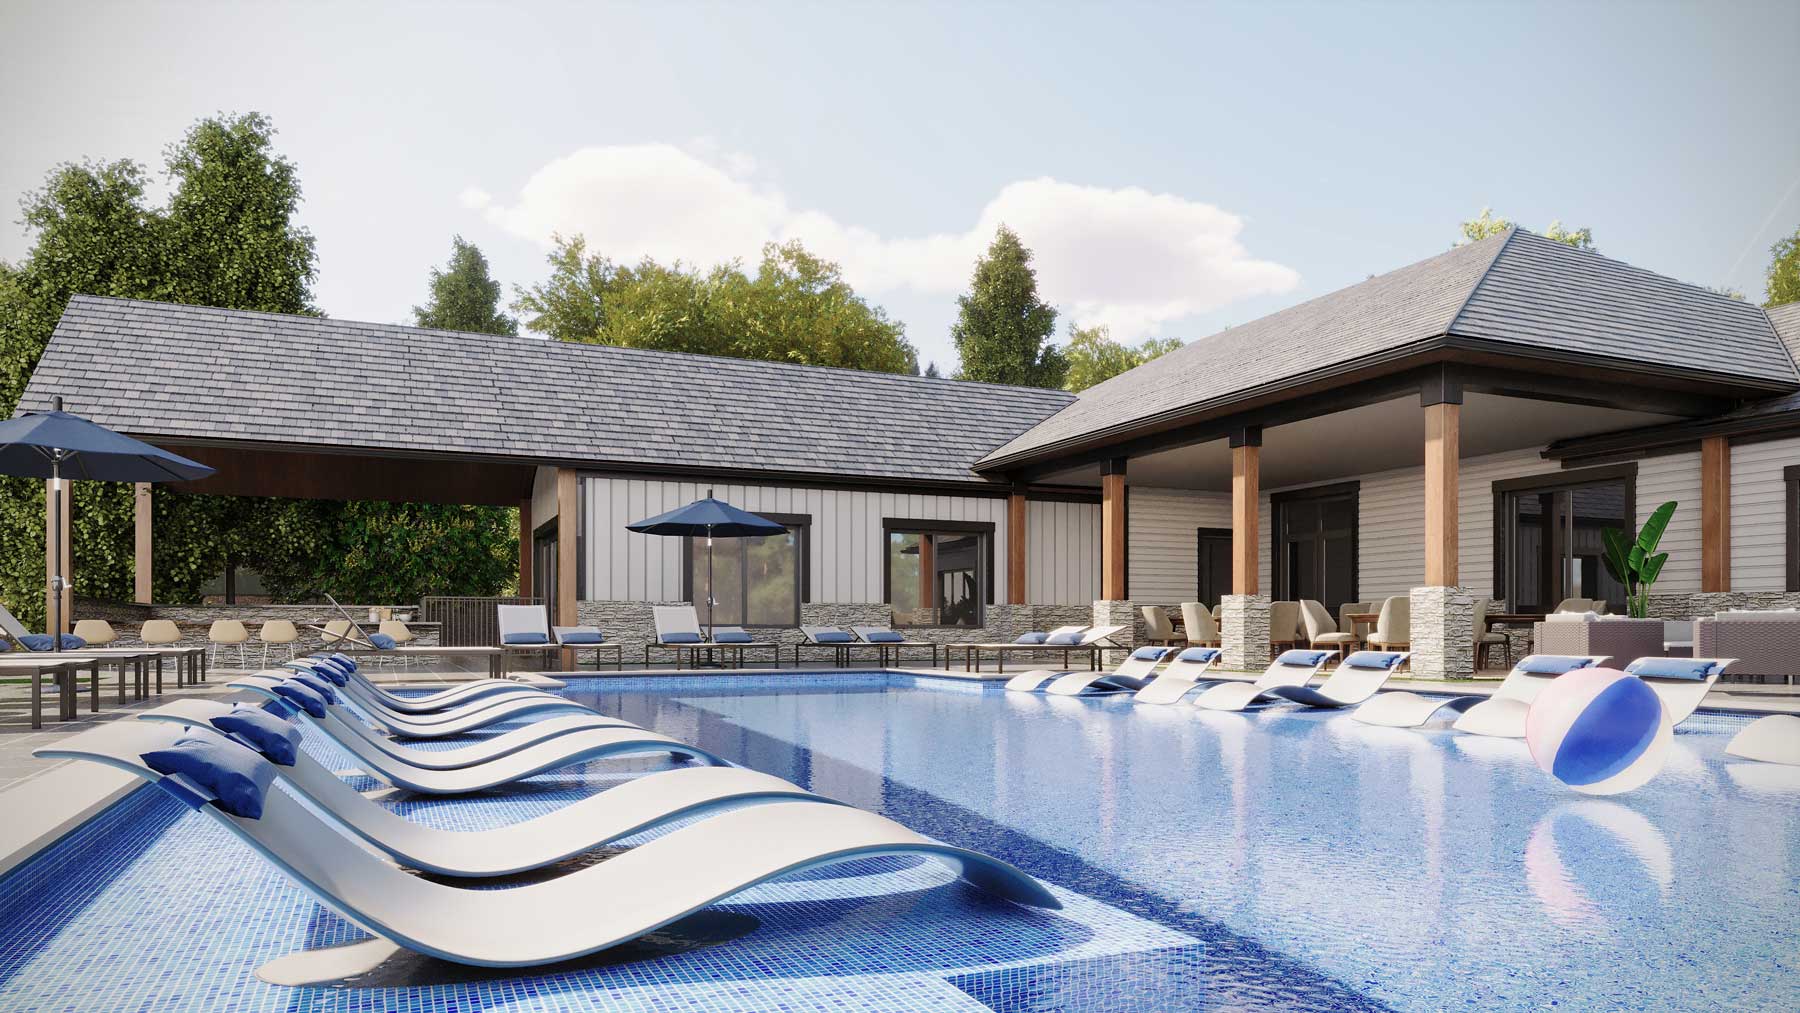 Pool with lounge chairs